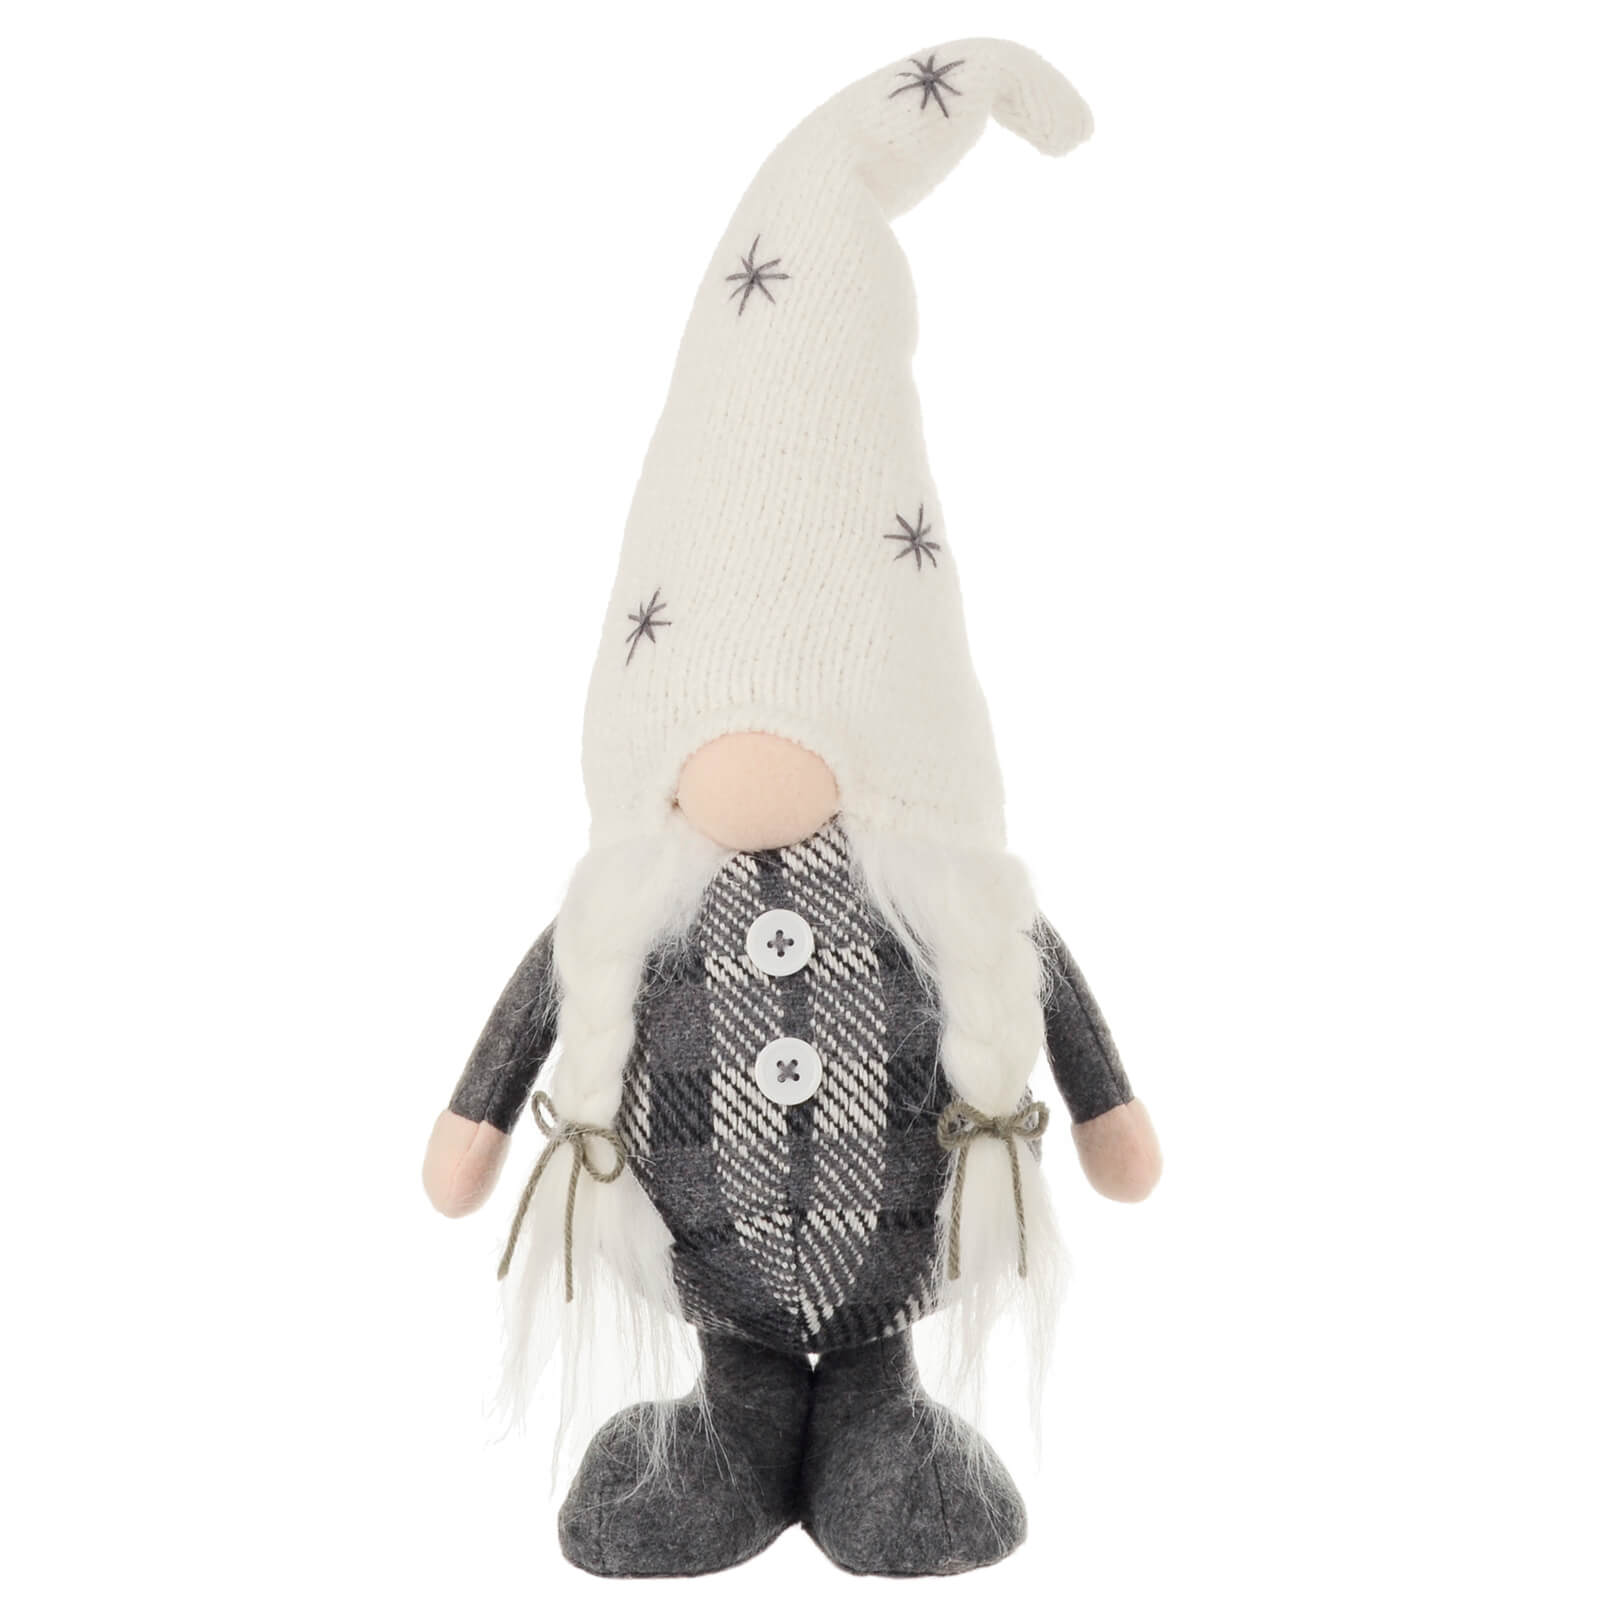 Girl gonk 41cm with white hat with grey stars